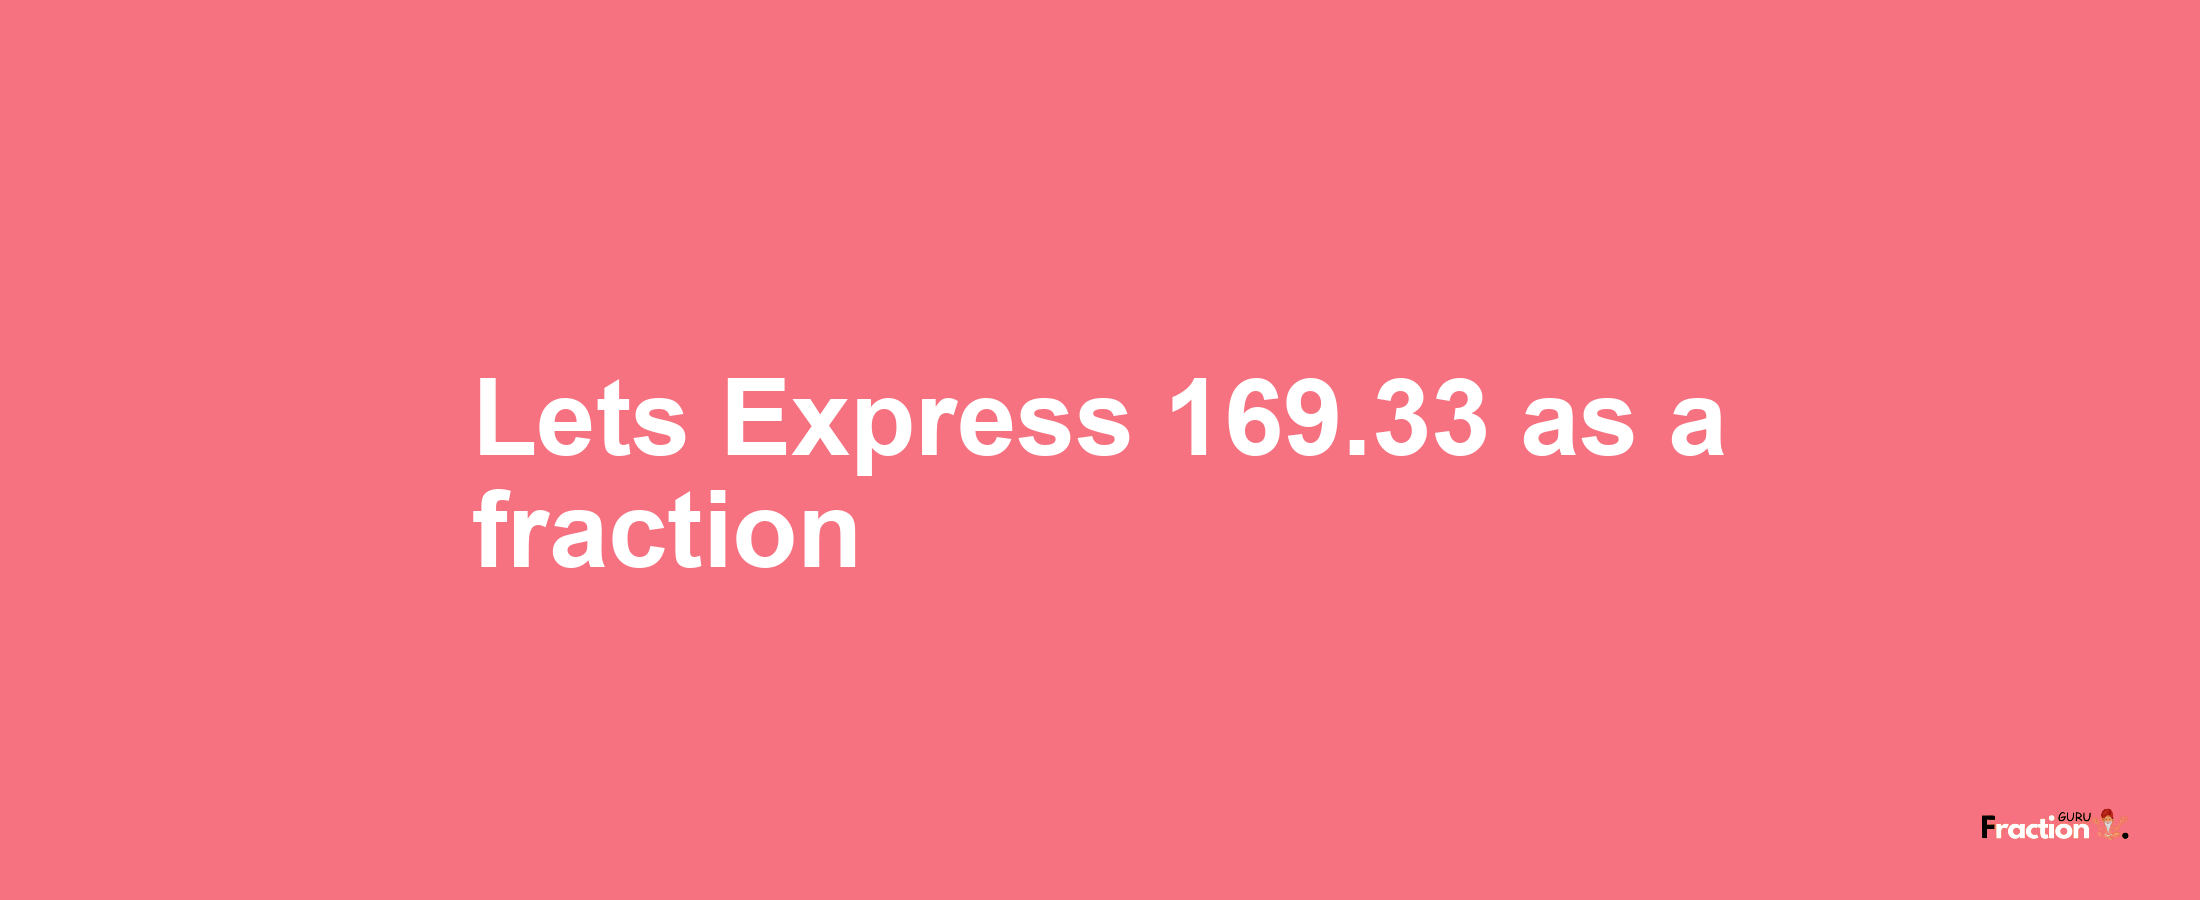 Lets Express 169.33 as afraction